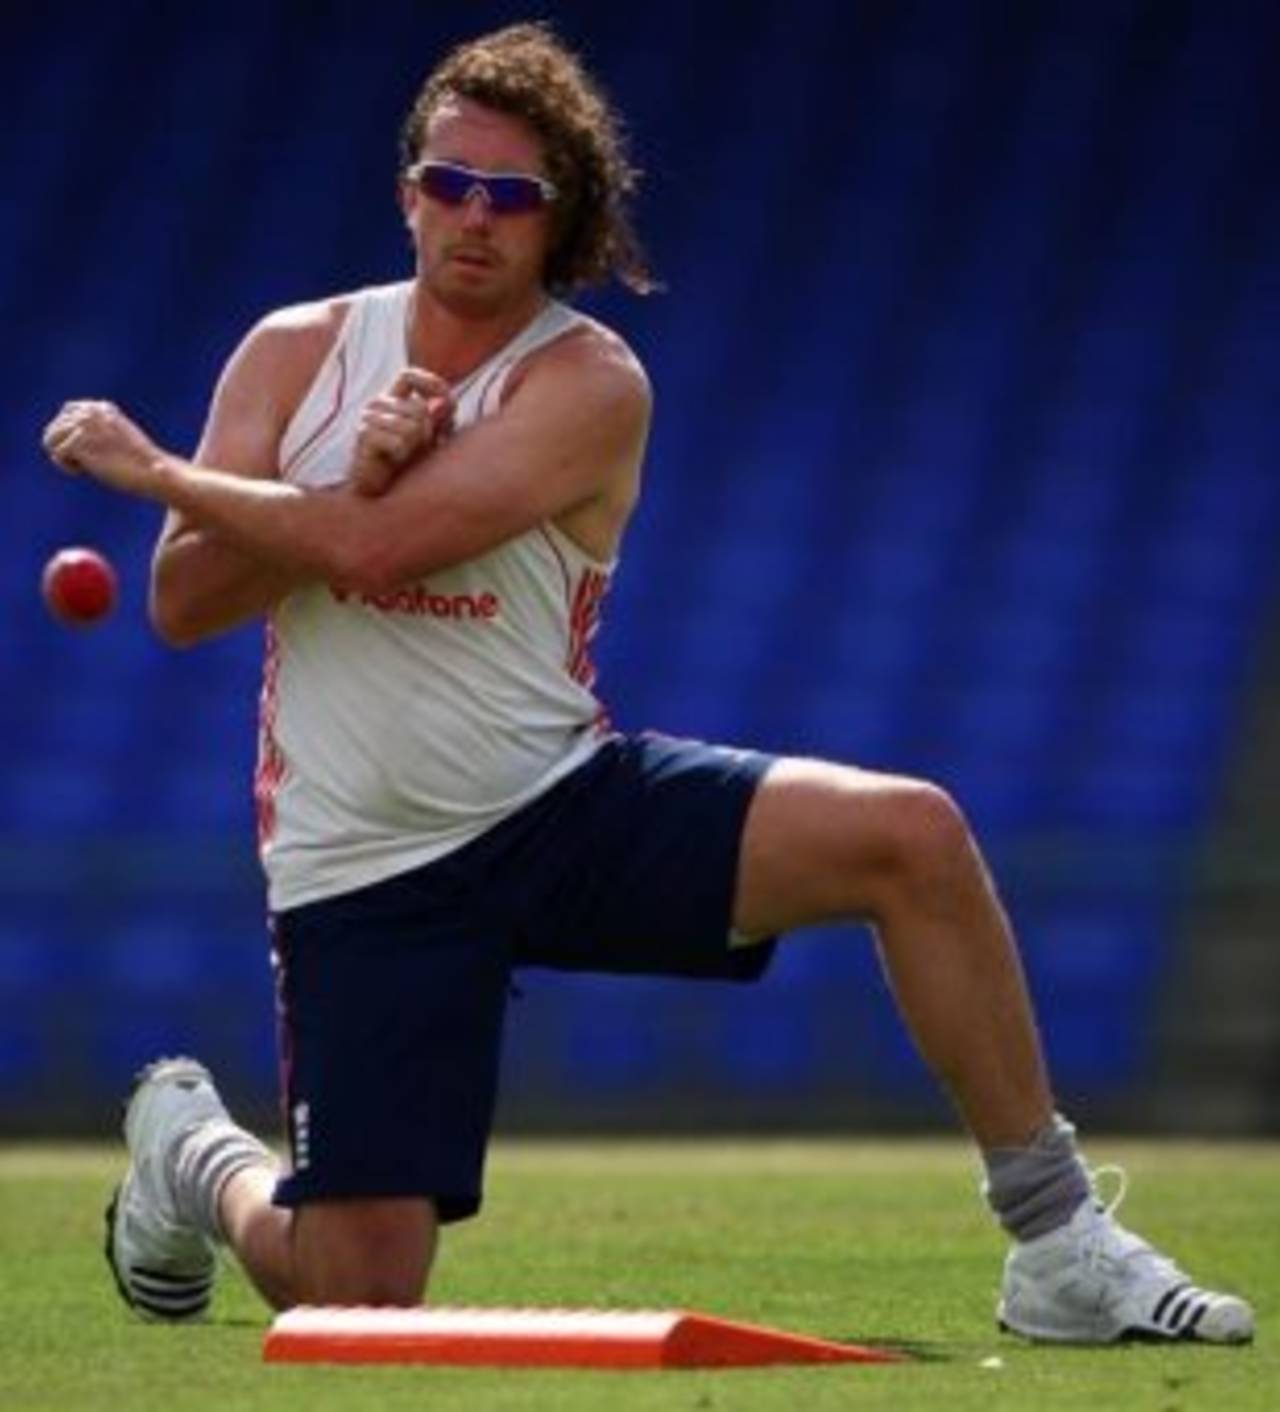 Ryan Sidebottom during a fielding session, St Kitts, January 24, 2009